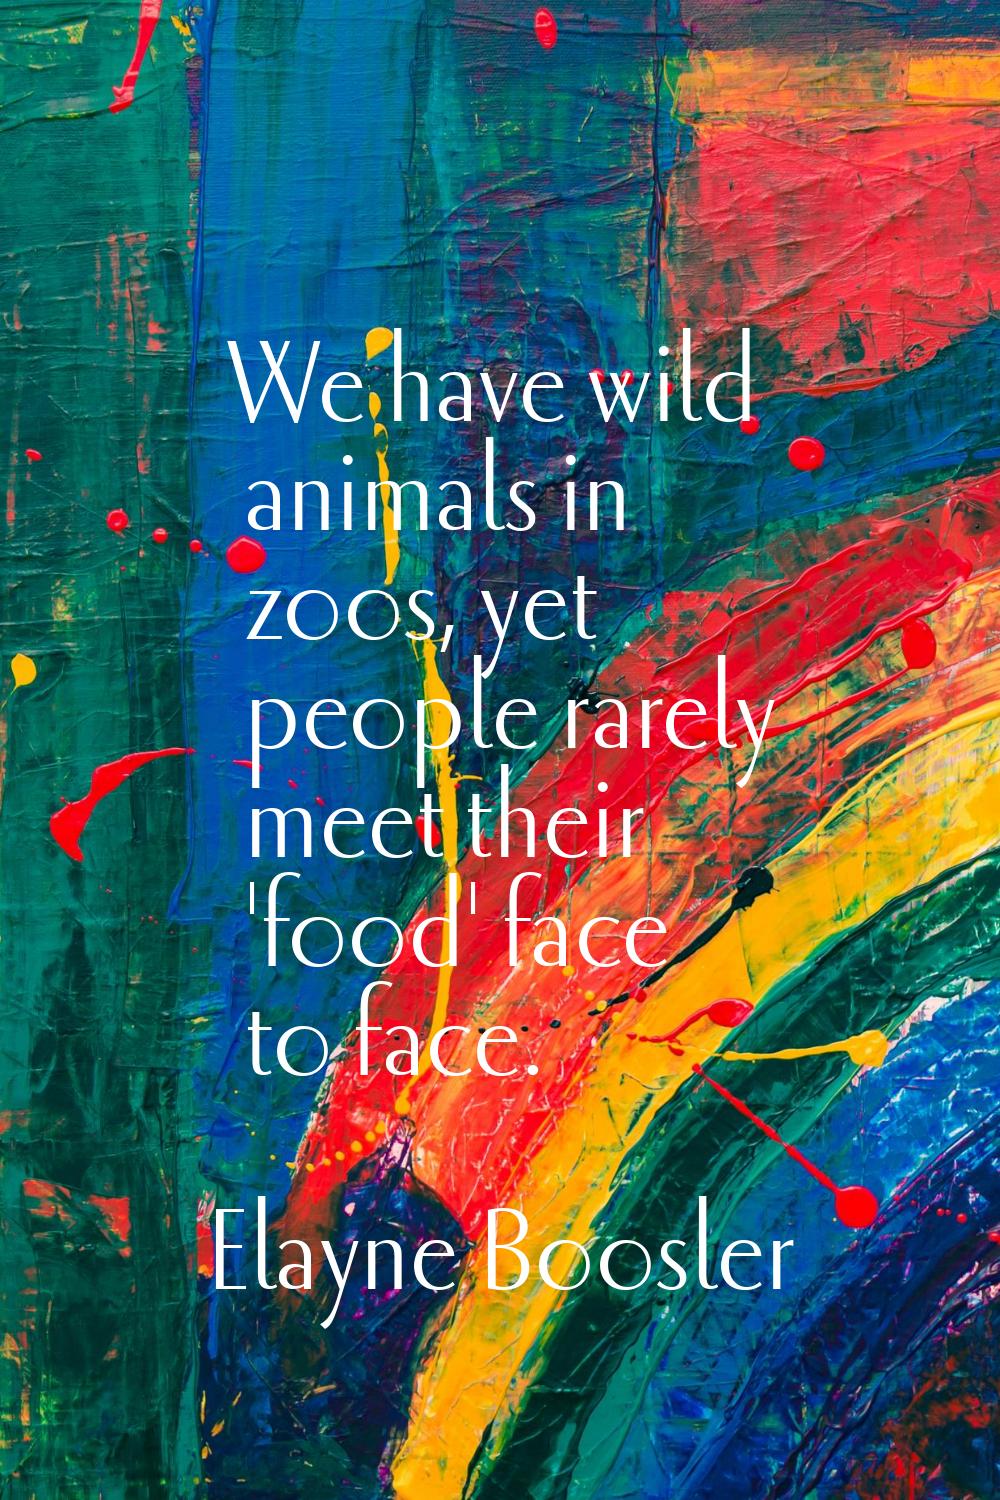 We have wild animals in zoos, yet people rarely meet their 'food' face to face.